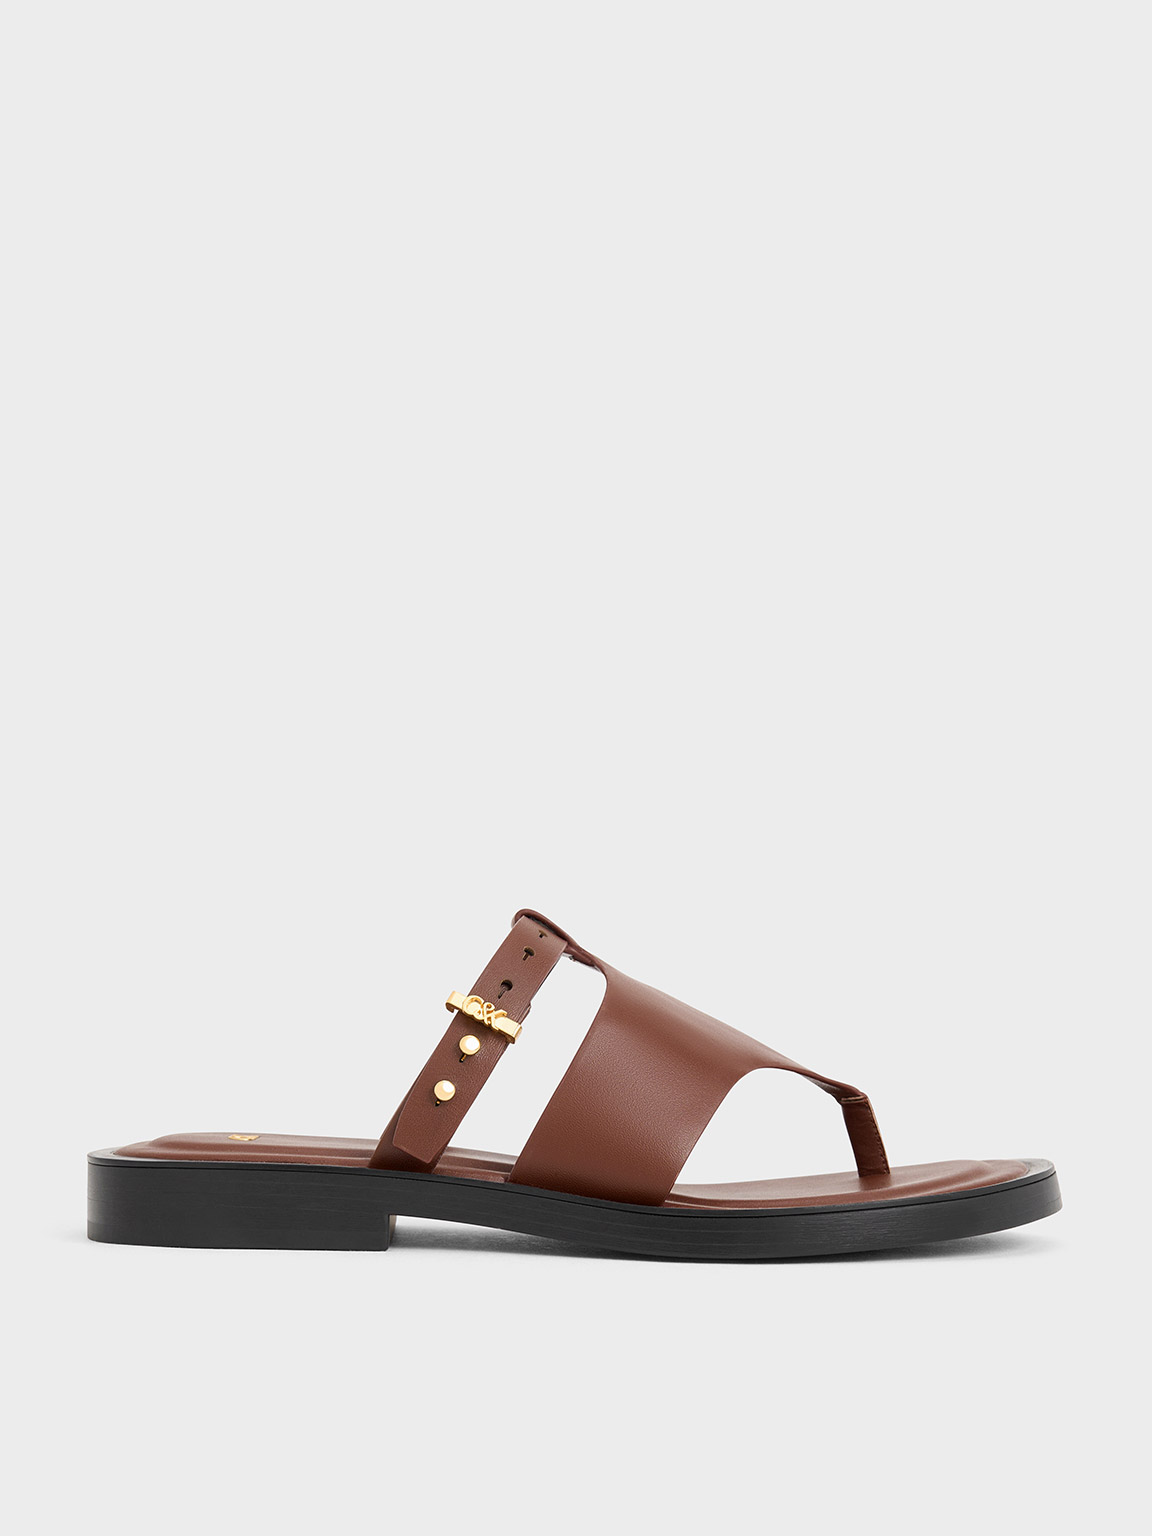 Brown Leather Asymmetric Thong Sandals | CHARLES u0026 KEITH